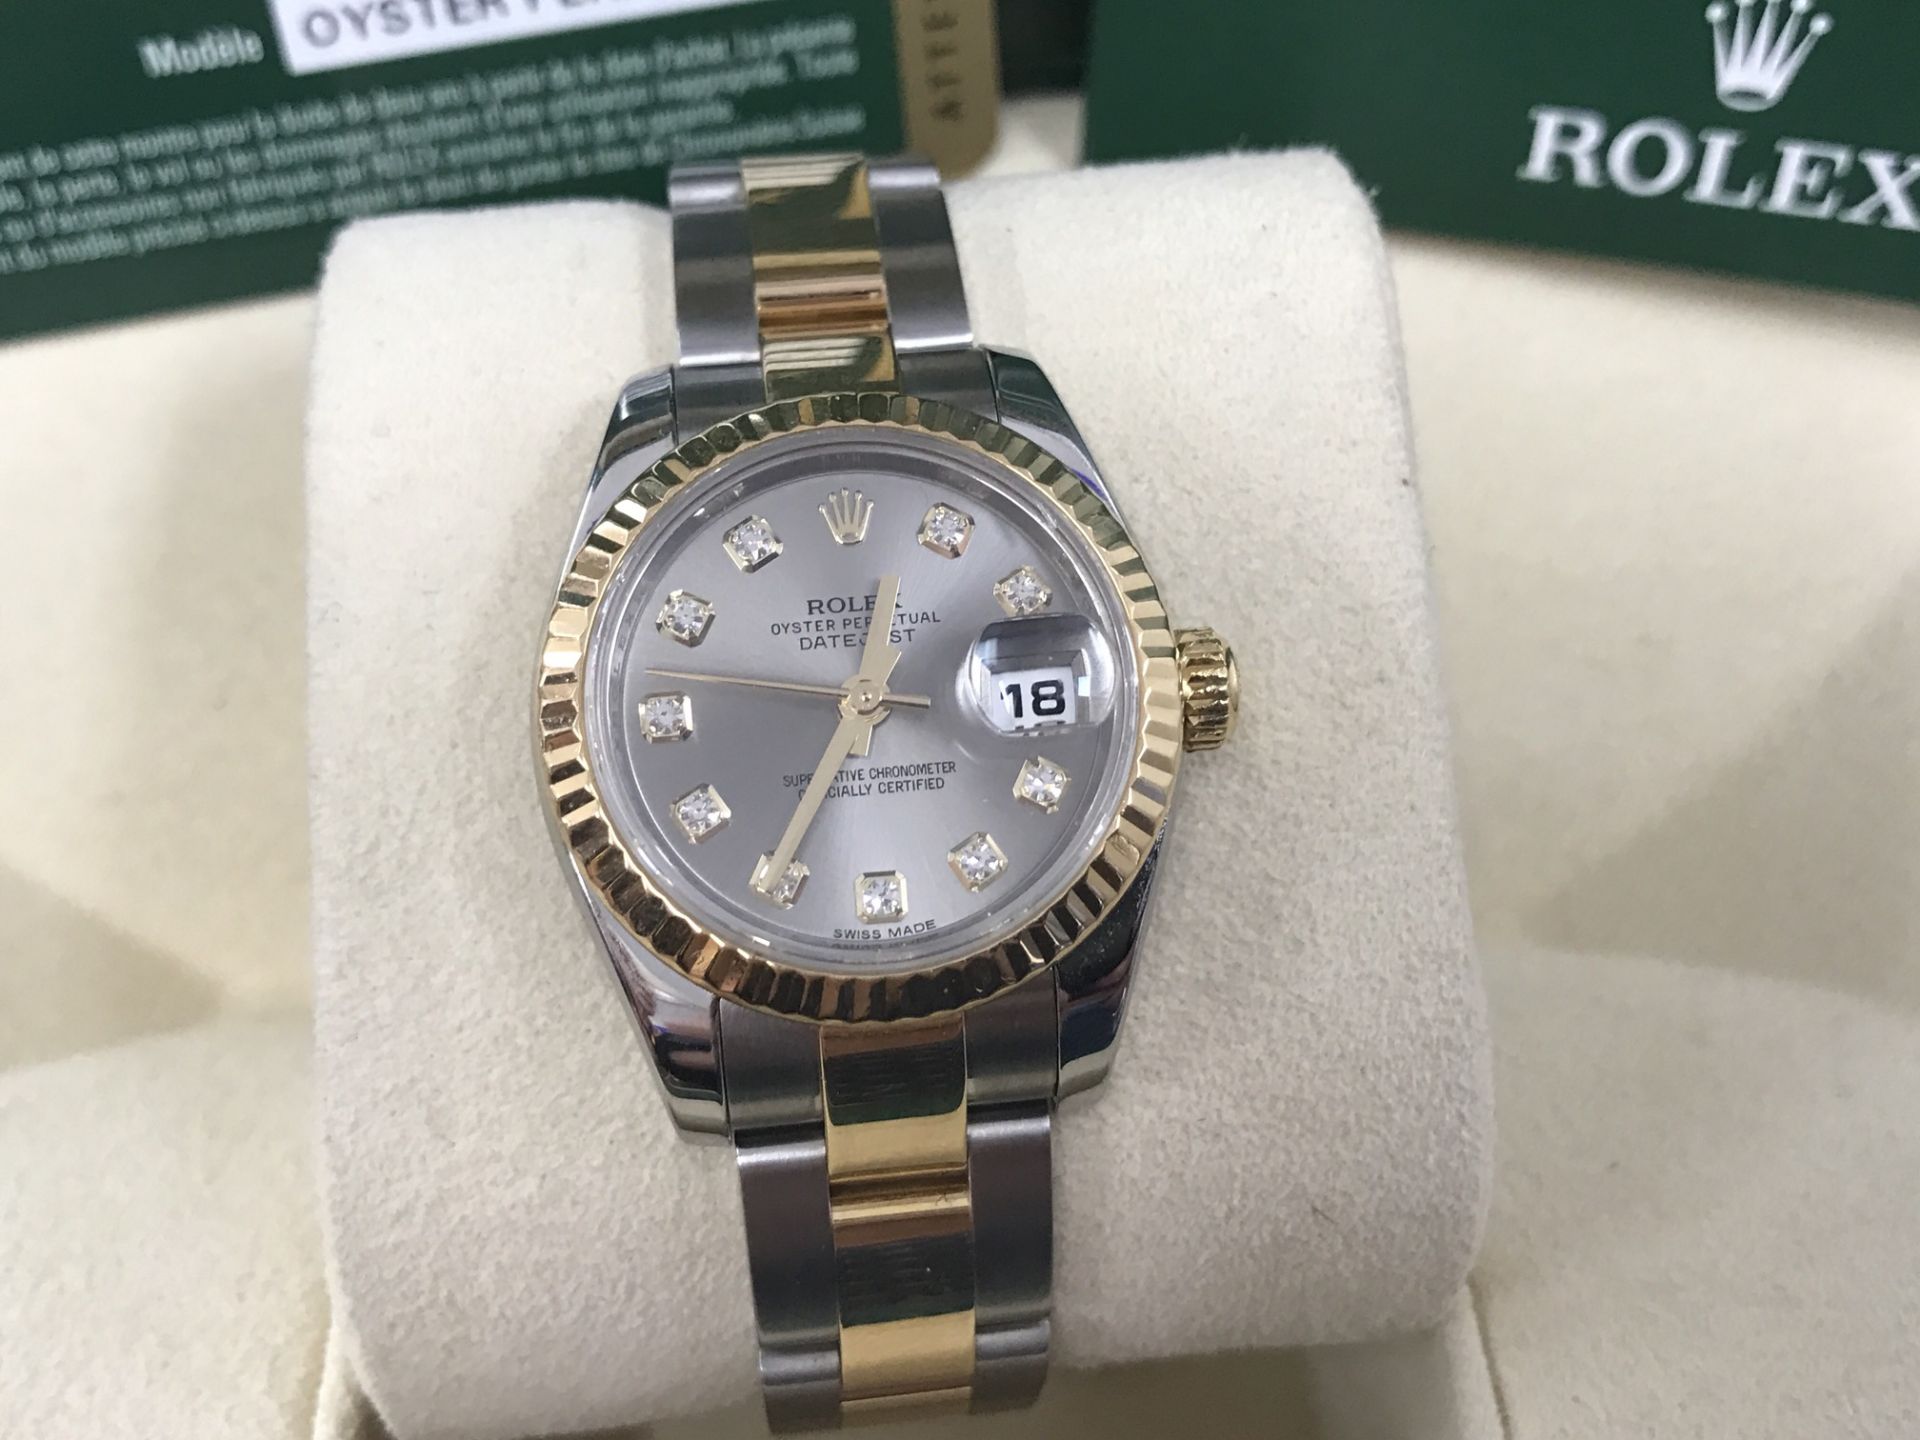 LADIES STEEL & GOLD ROLEX DATEJUST SET WITH DIAMONDS WITH BOX & PAPERS - Image 10 of 10